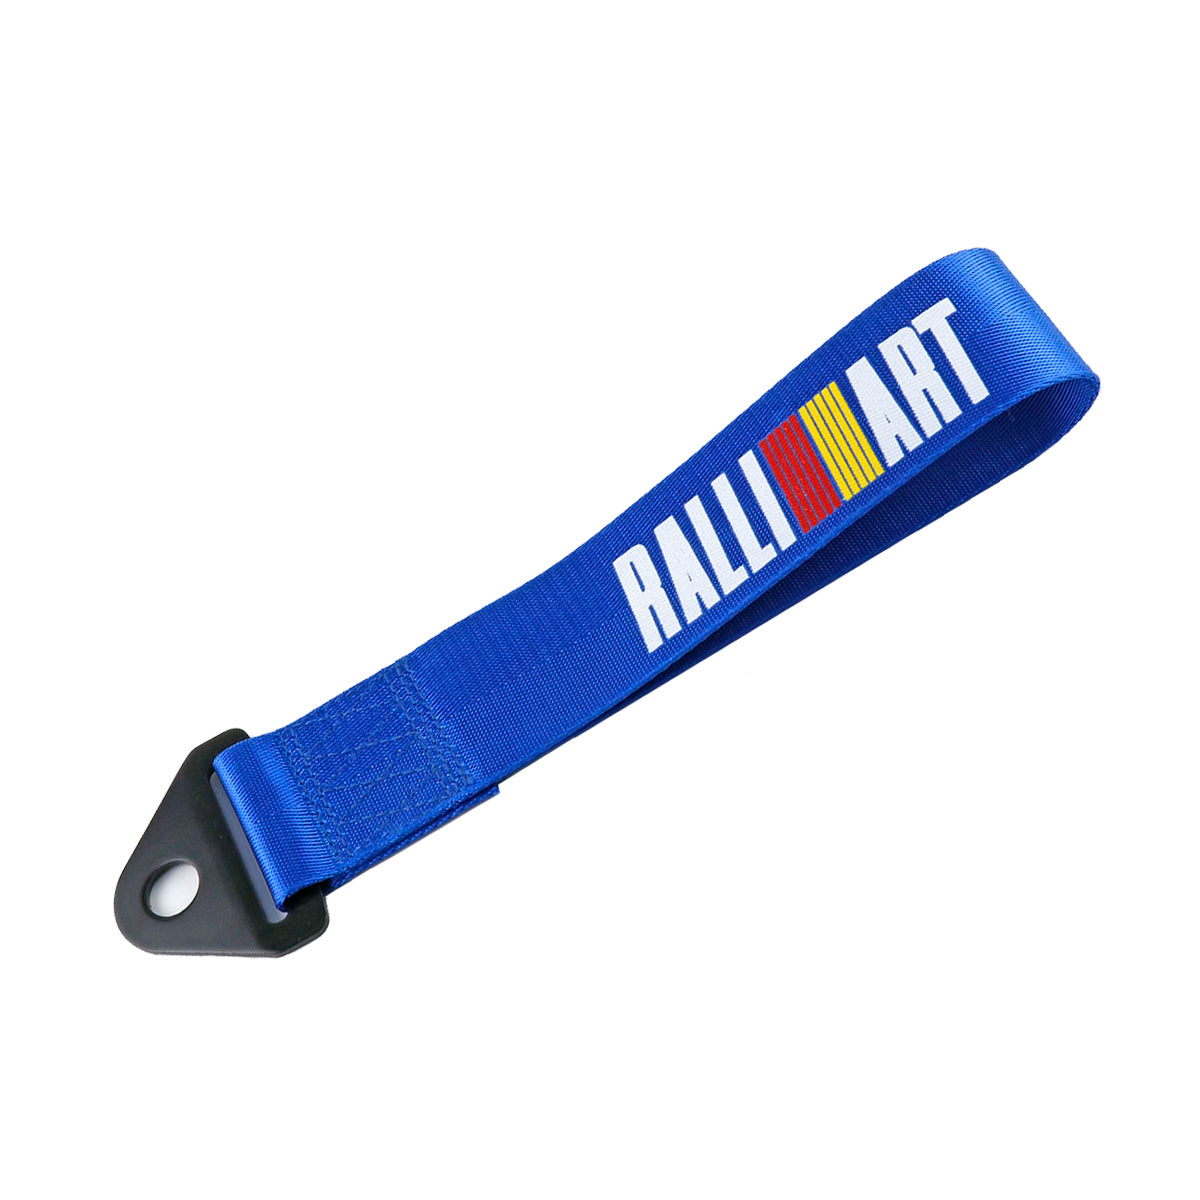 Ralliart JDM tow strap in blue.